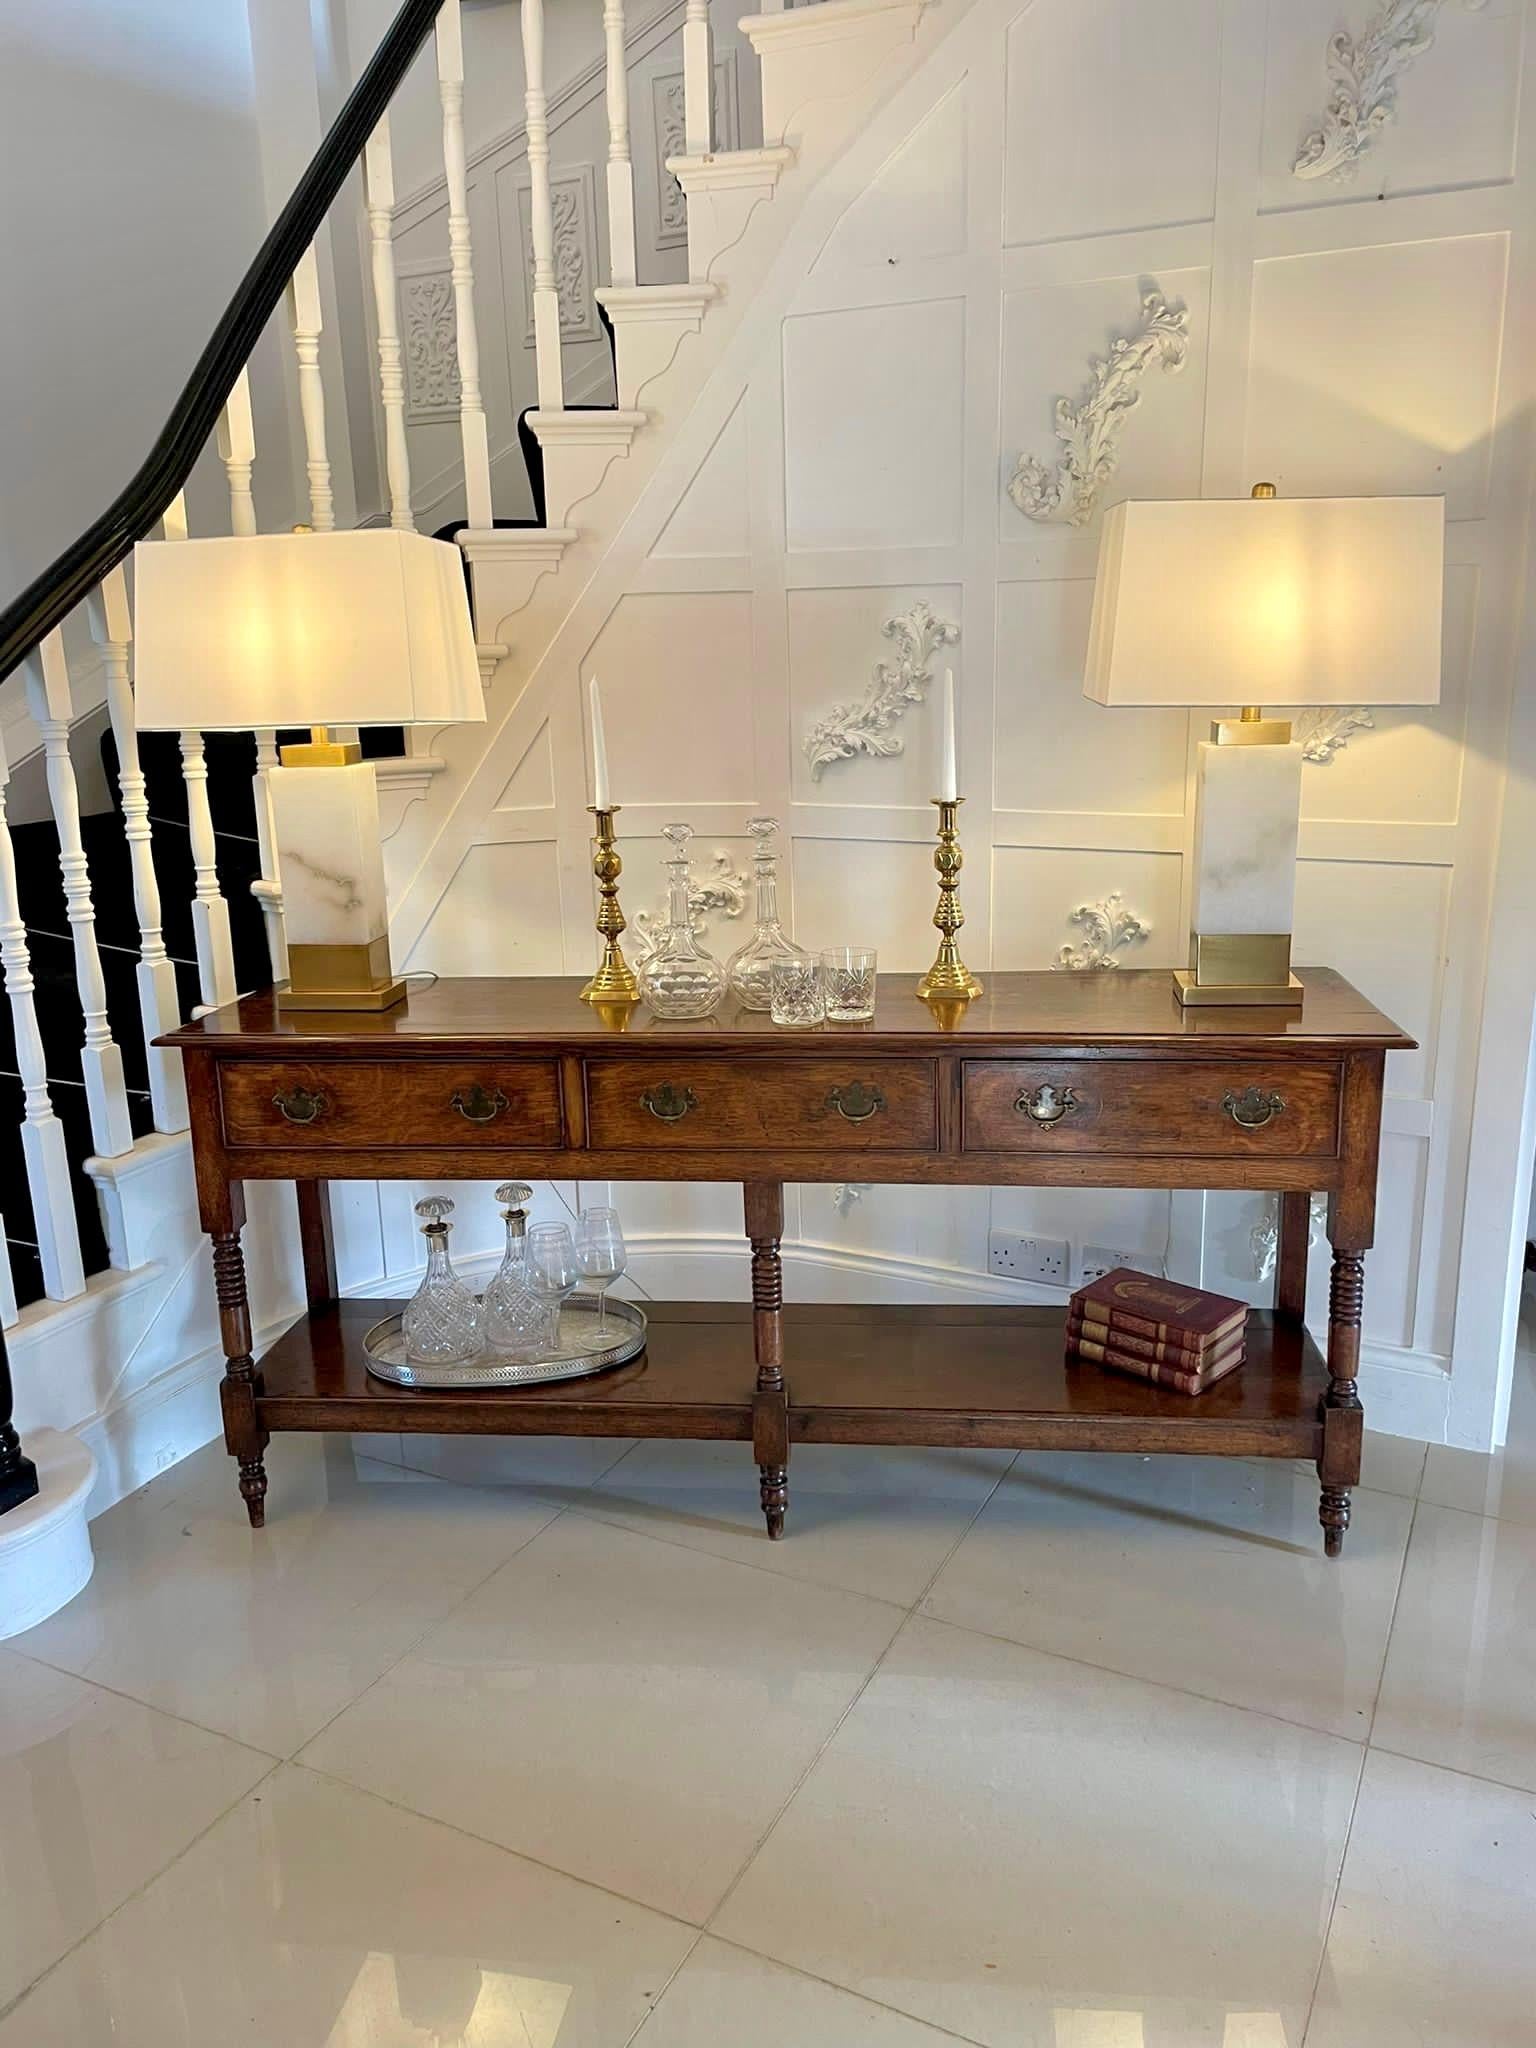 Outstanding quality antique George III oak dresser base having a quality oak rectangular shaped top with a moulded edge above 3 long cockbeeded drawers with brass handles, turned oak supports standing on elegant turned feet united by an oak pot